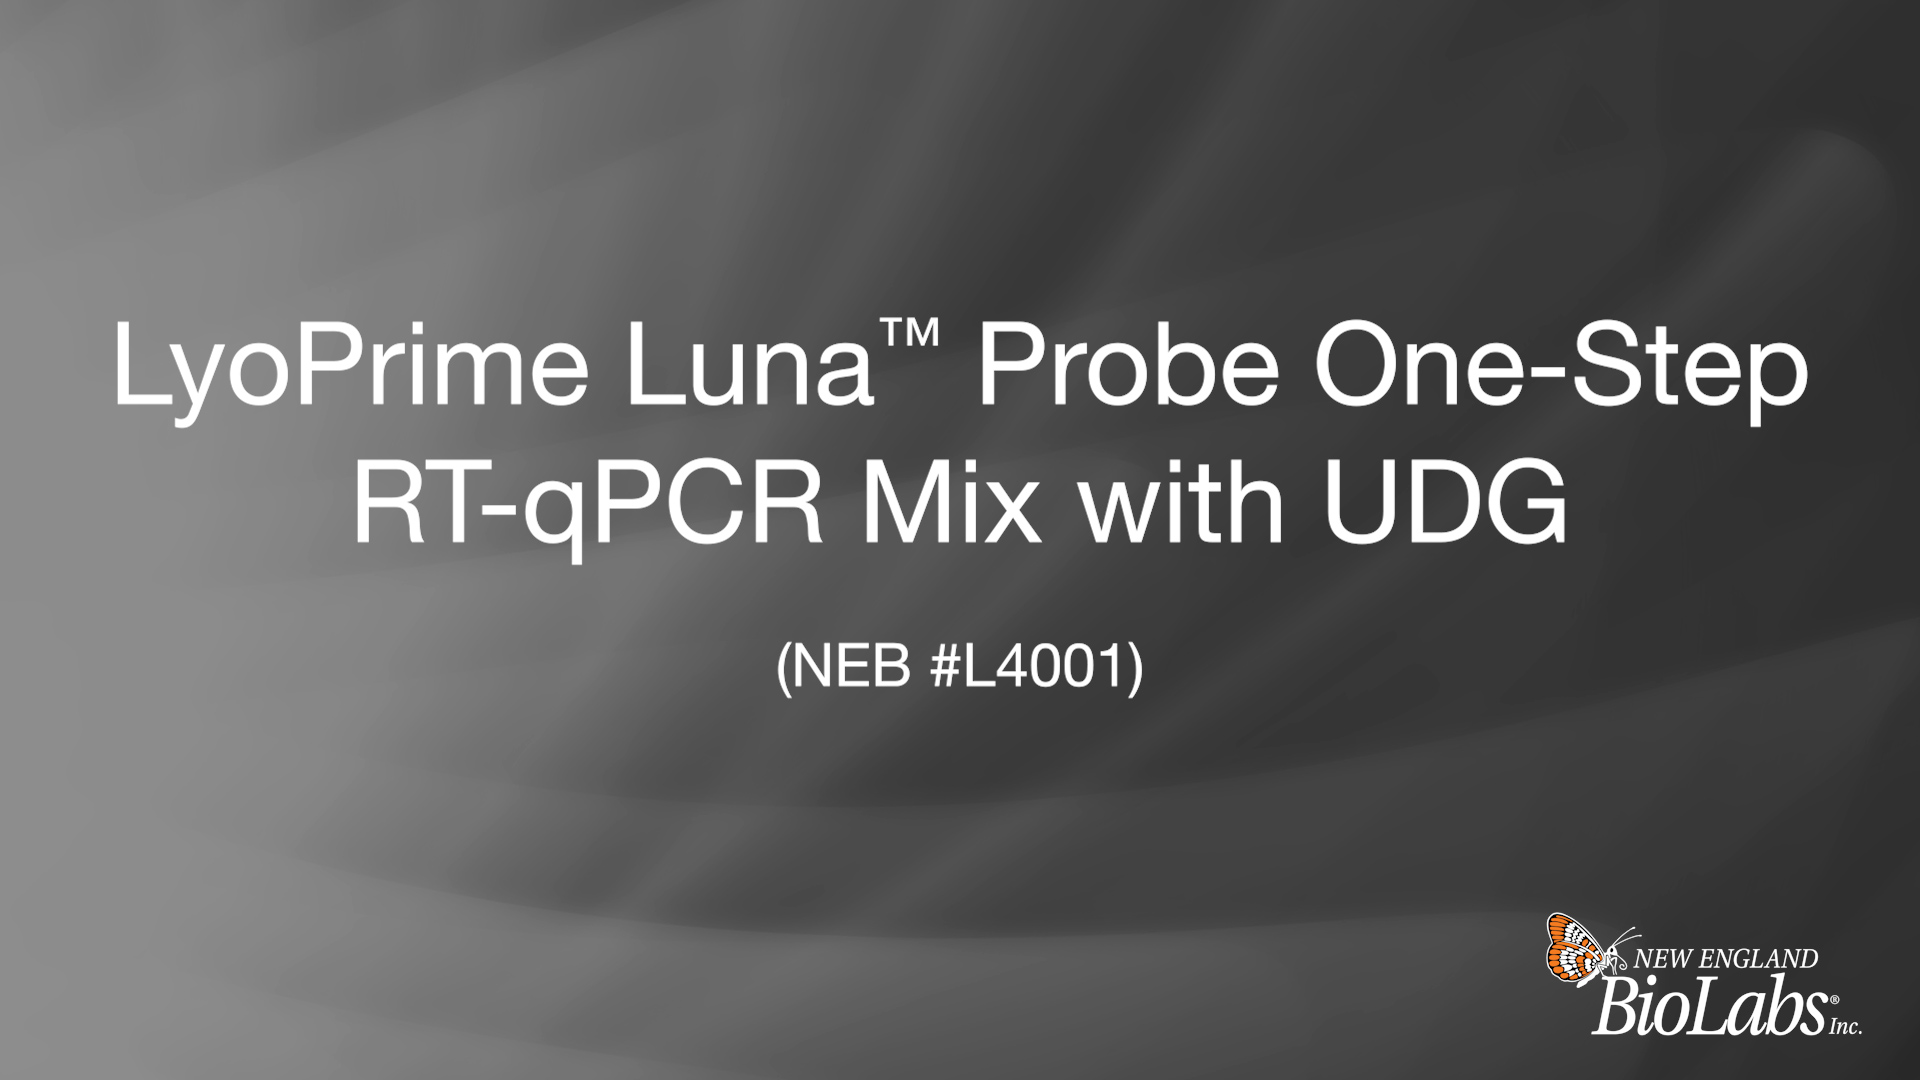 LyoPrime Luna™ Probe One-Step RT-qPCR Mix with UDG